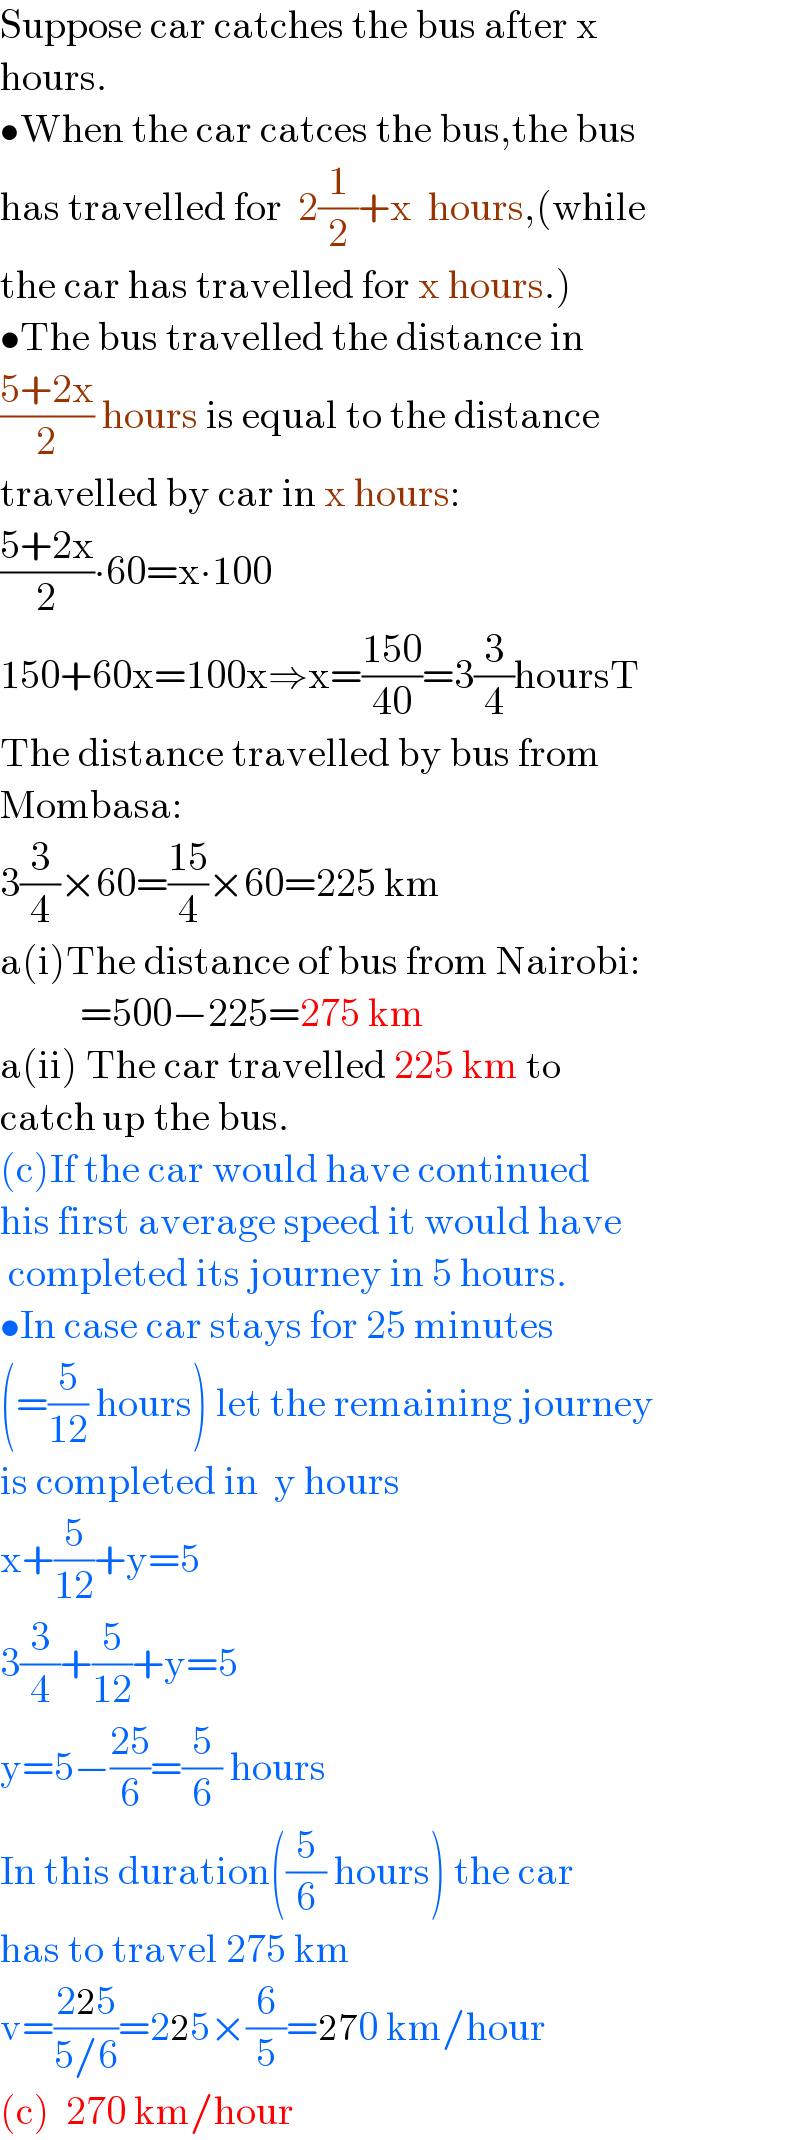 Suppose car catches the bus after x  hours.  •When the car catces the bus,the bus  has travelled for  2(1/2)+x  hours,(while  the car has travelled for x hours.)  •The bus travelled the distance in  ((5+2x)/2) hours is equal to the distance  travelled by car in x hours:  ((5+2x)/2)∙60=x∙100  150+60x=100x⇒x=((150)/(40))=3(3/4)hoursT  The distance travelled by bus from  Mombasa:  3(3/4)×60=((15)/4)×60=225 km  a(i)The distance of bus from Nairobi:            =500−225=275 km  a(ii) The car travelled 225 km to  catch up the bus.  (c)If the car would have continued  his first average speed it would have   completed its journey in 5 hours.  •In case car stays for 25 minutes  (=(5/(12)) hours) let the remaining journey  is completed in  y hours  x+(5/(12))+y=5  3(3/4)+(5/(12))+y=5  y=5−((25)/6)=(5/6) hours  In this duration((5/6) hours) the car  has to travel 275 km  v=((225)/(5/6))=225×(6/5)=270 km/hour  (c)  270 km/hour  